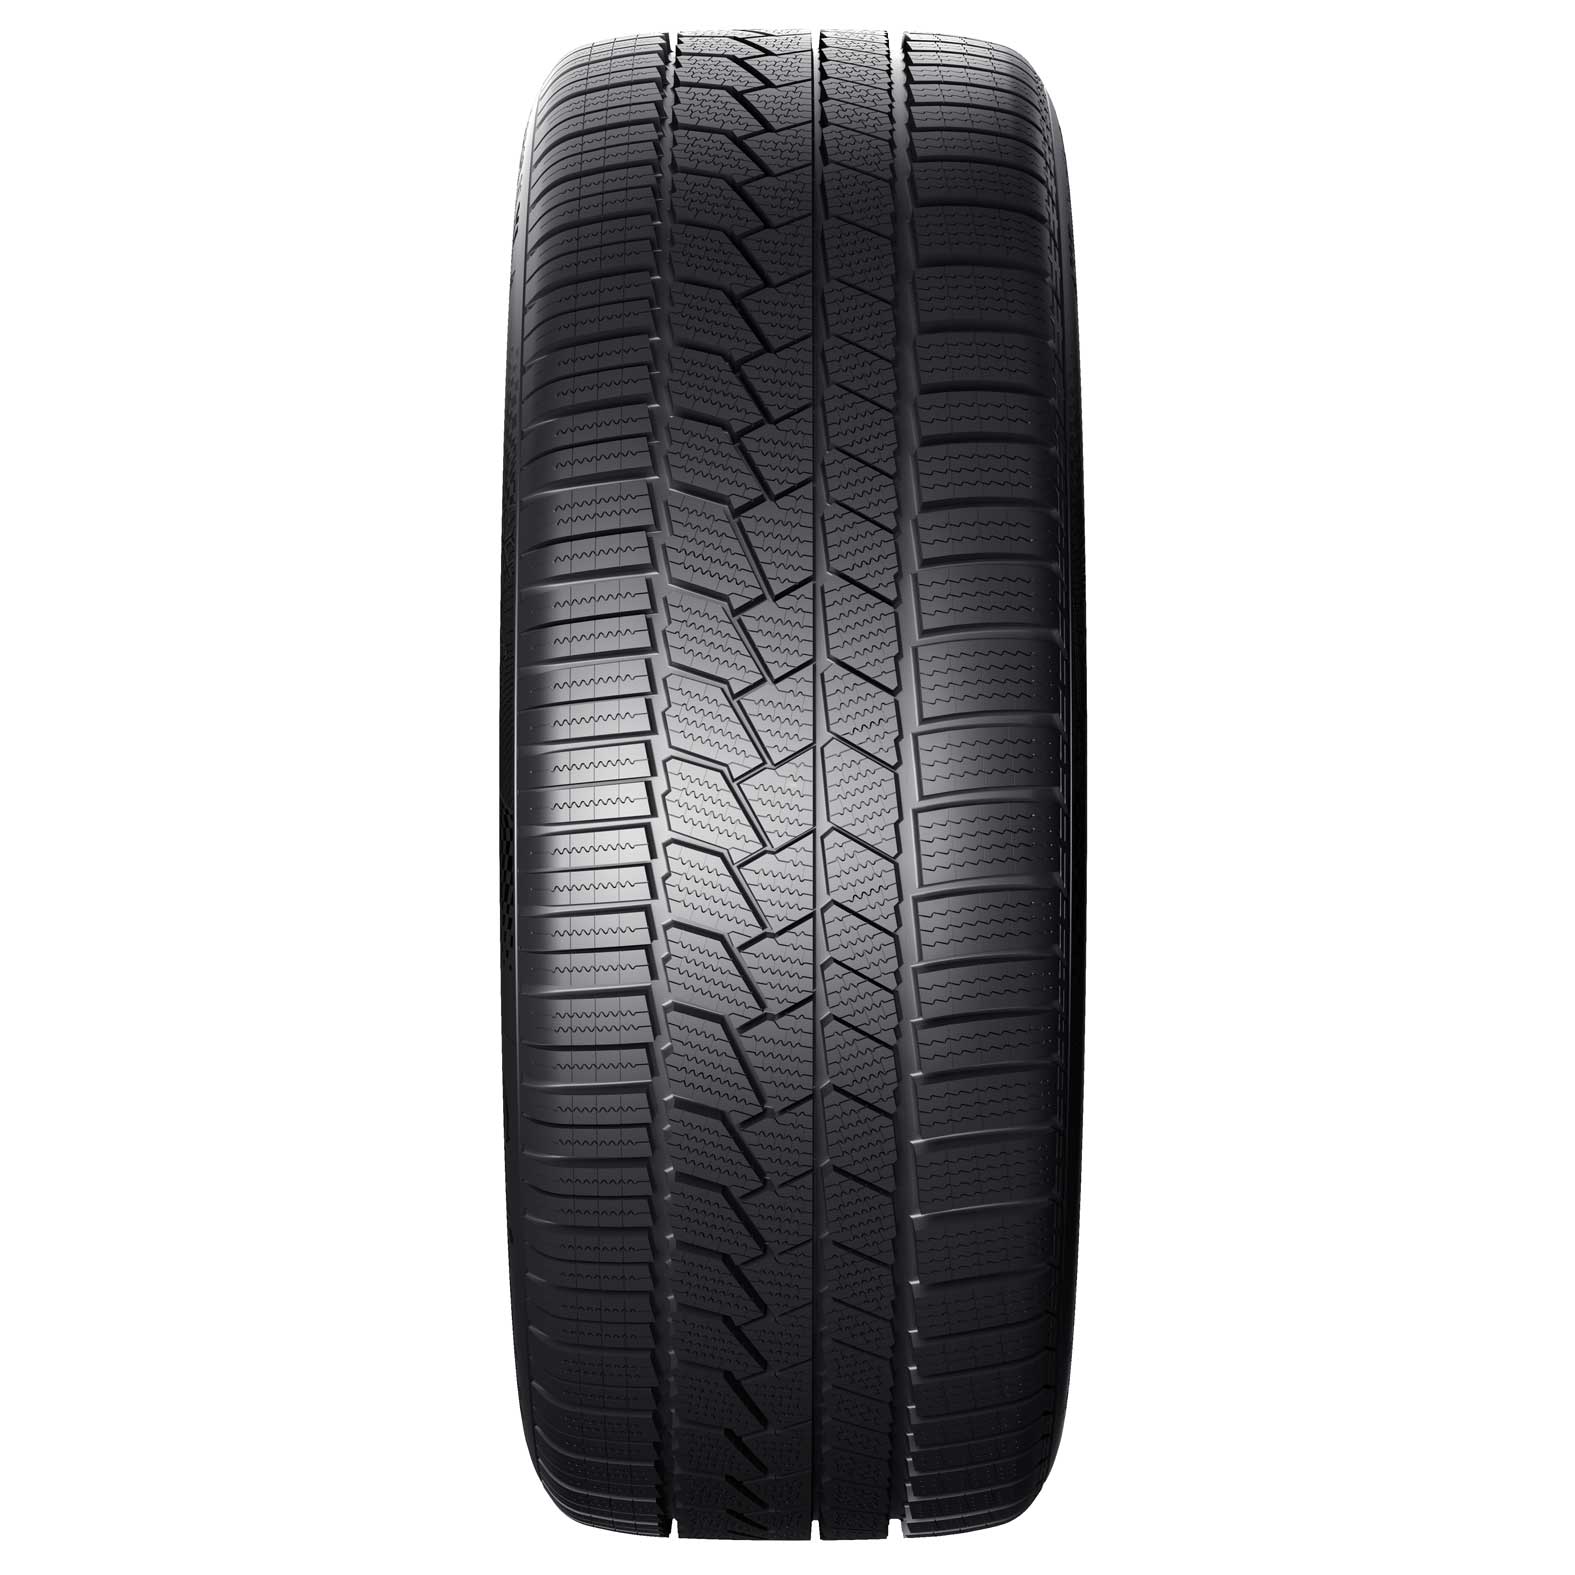 Tire | TS860 for Continental Winter Tires WinterContact S Kal